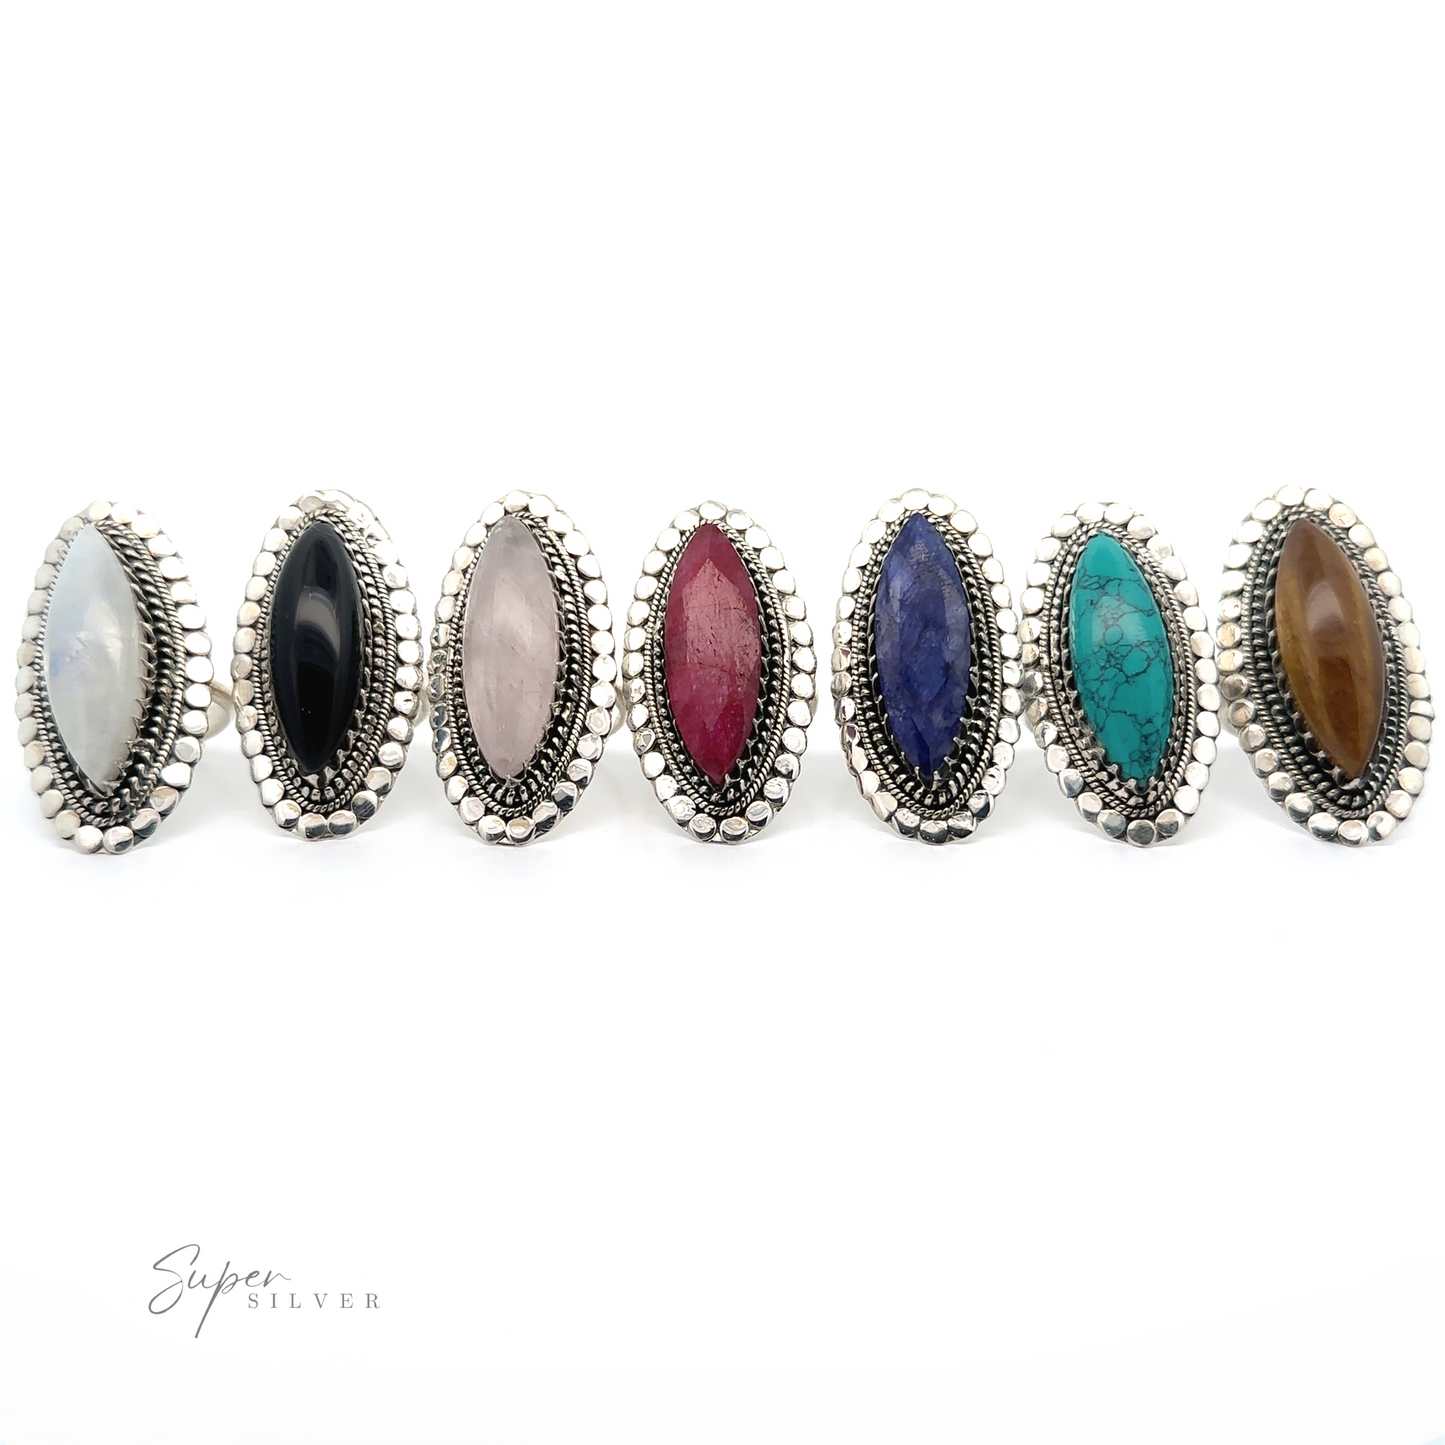 
                  
                    Seven oval rings with different colored stones set in silver on a white background. One standout is a Statement Marquise Shaped Gemstone Ring, adding a touch of bohemian jewelry charm to the collection. Text at the bottom reads "Super Silver.
                  
                